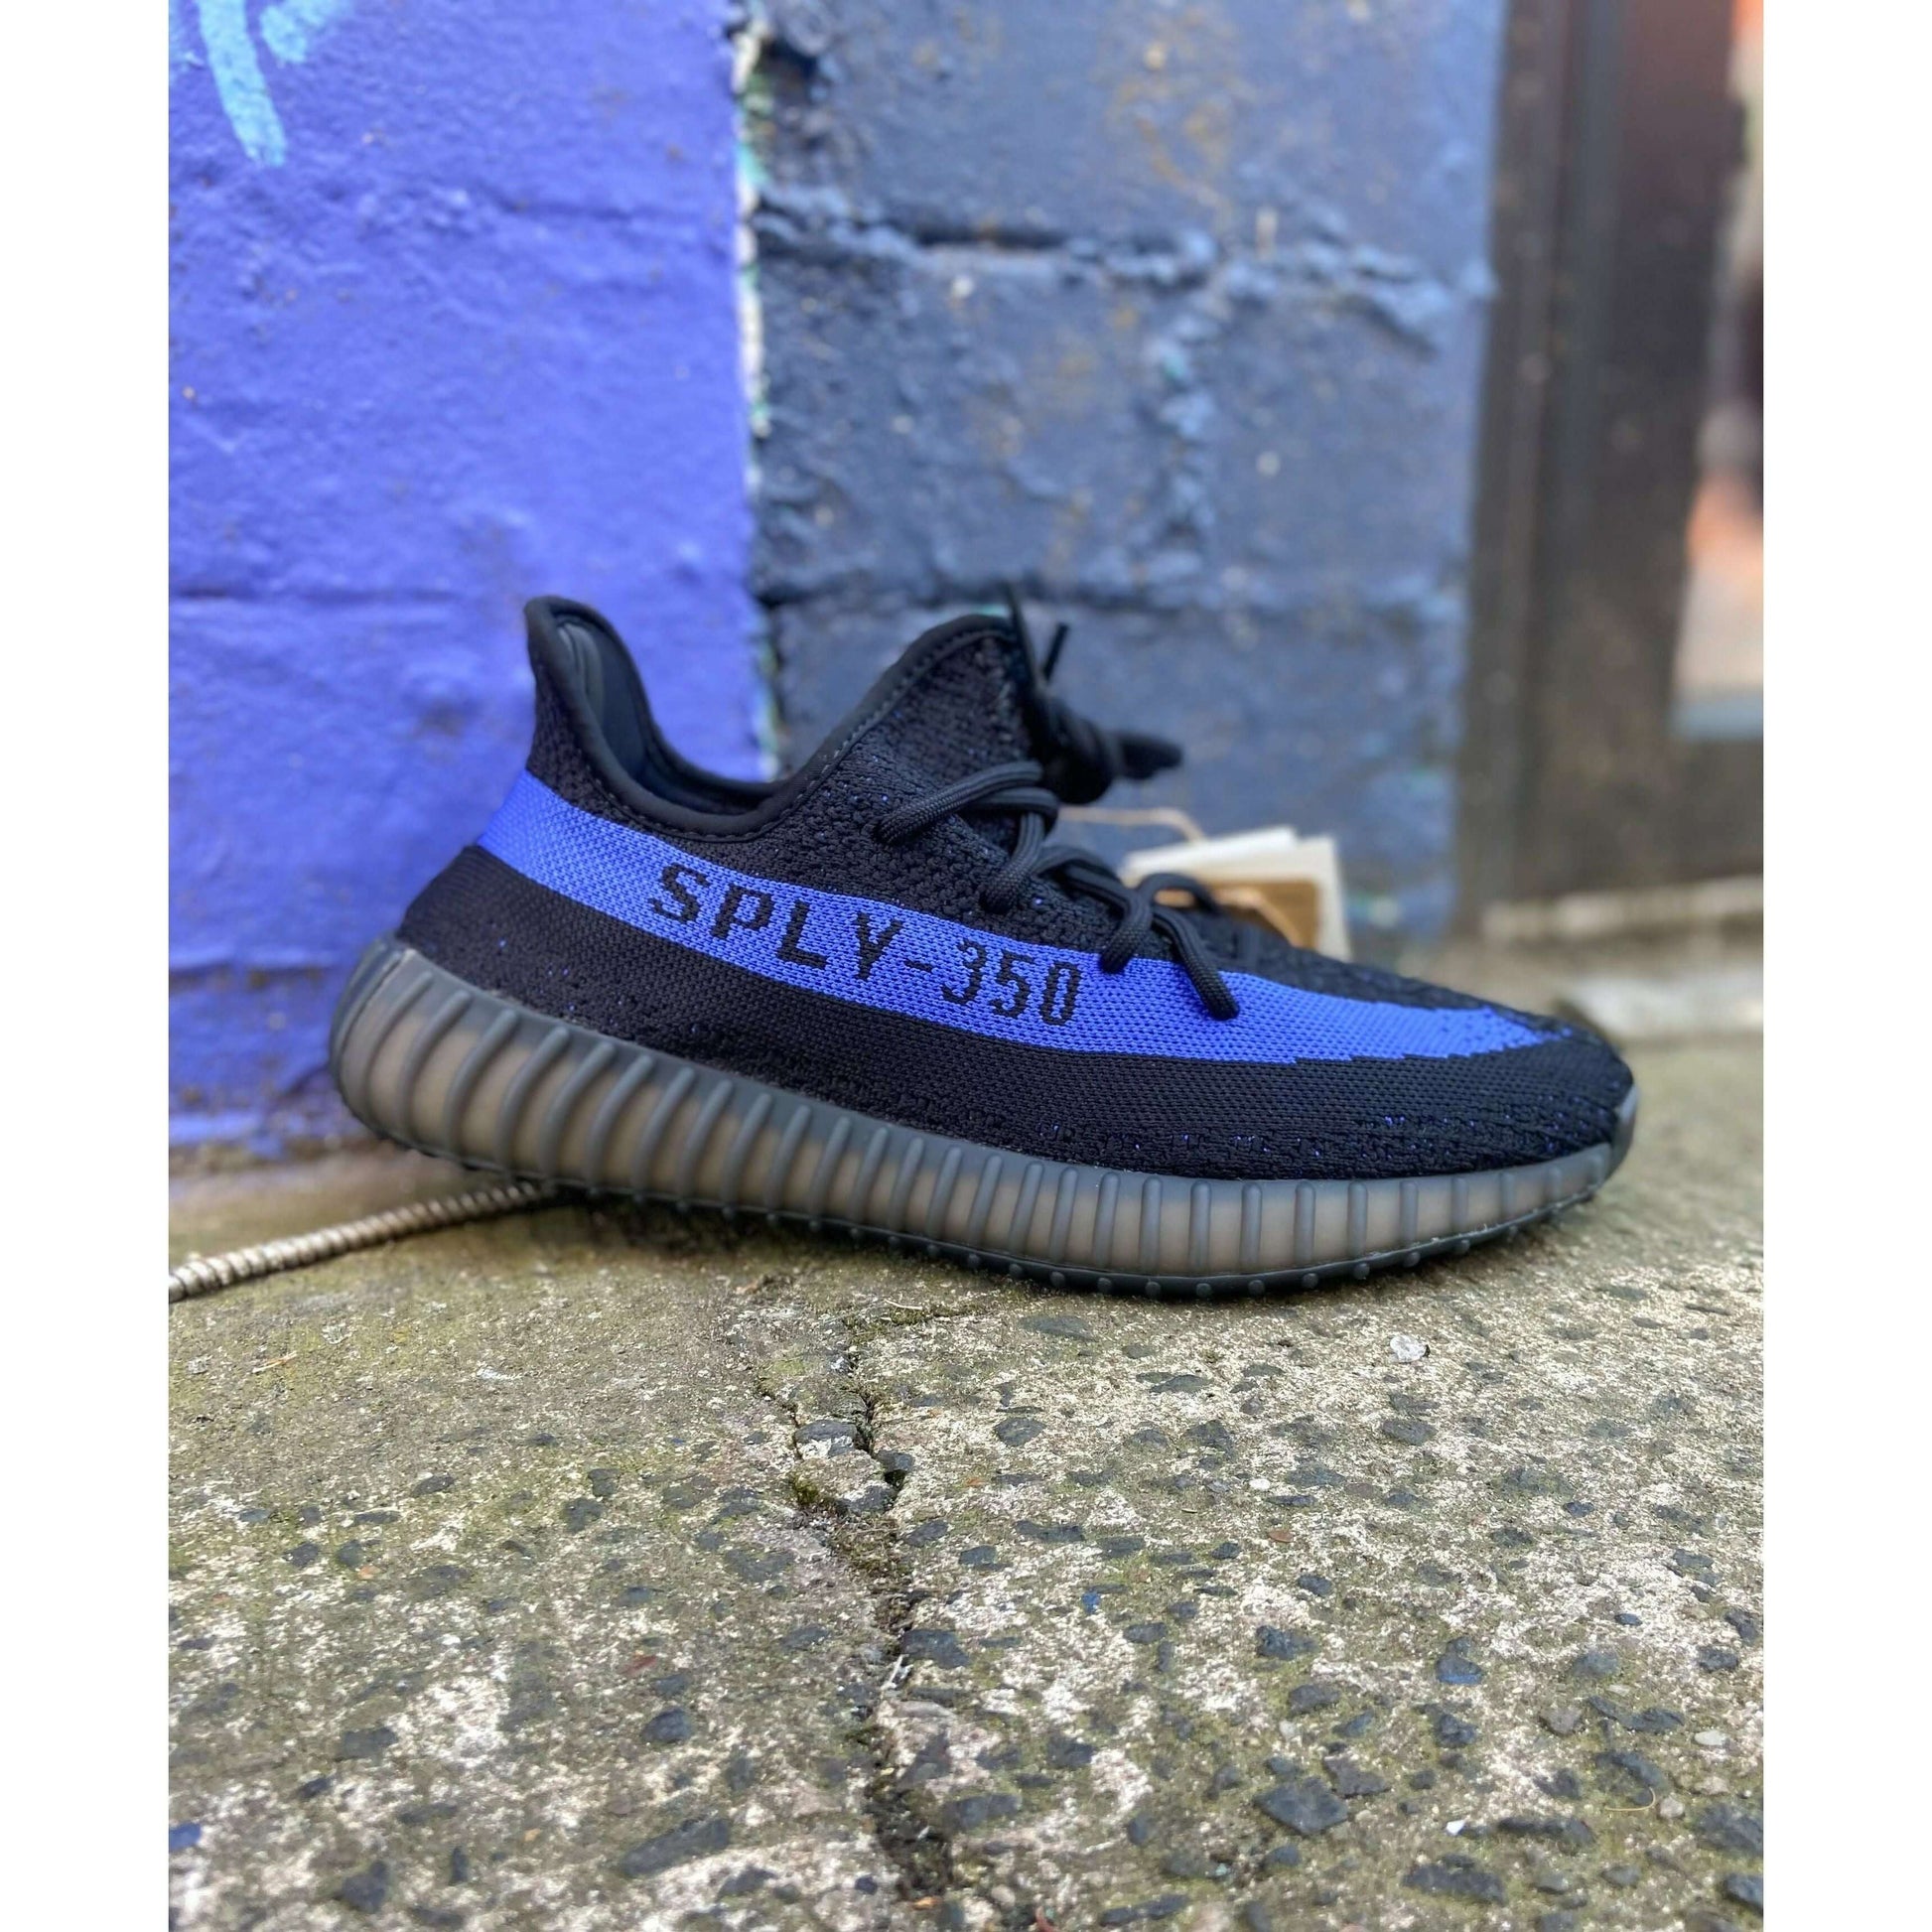 Adidas Yeezy Boost 350 V2 Dazzling Blue from Yeezy